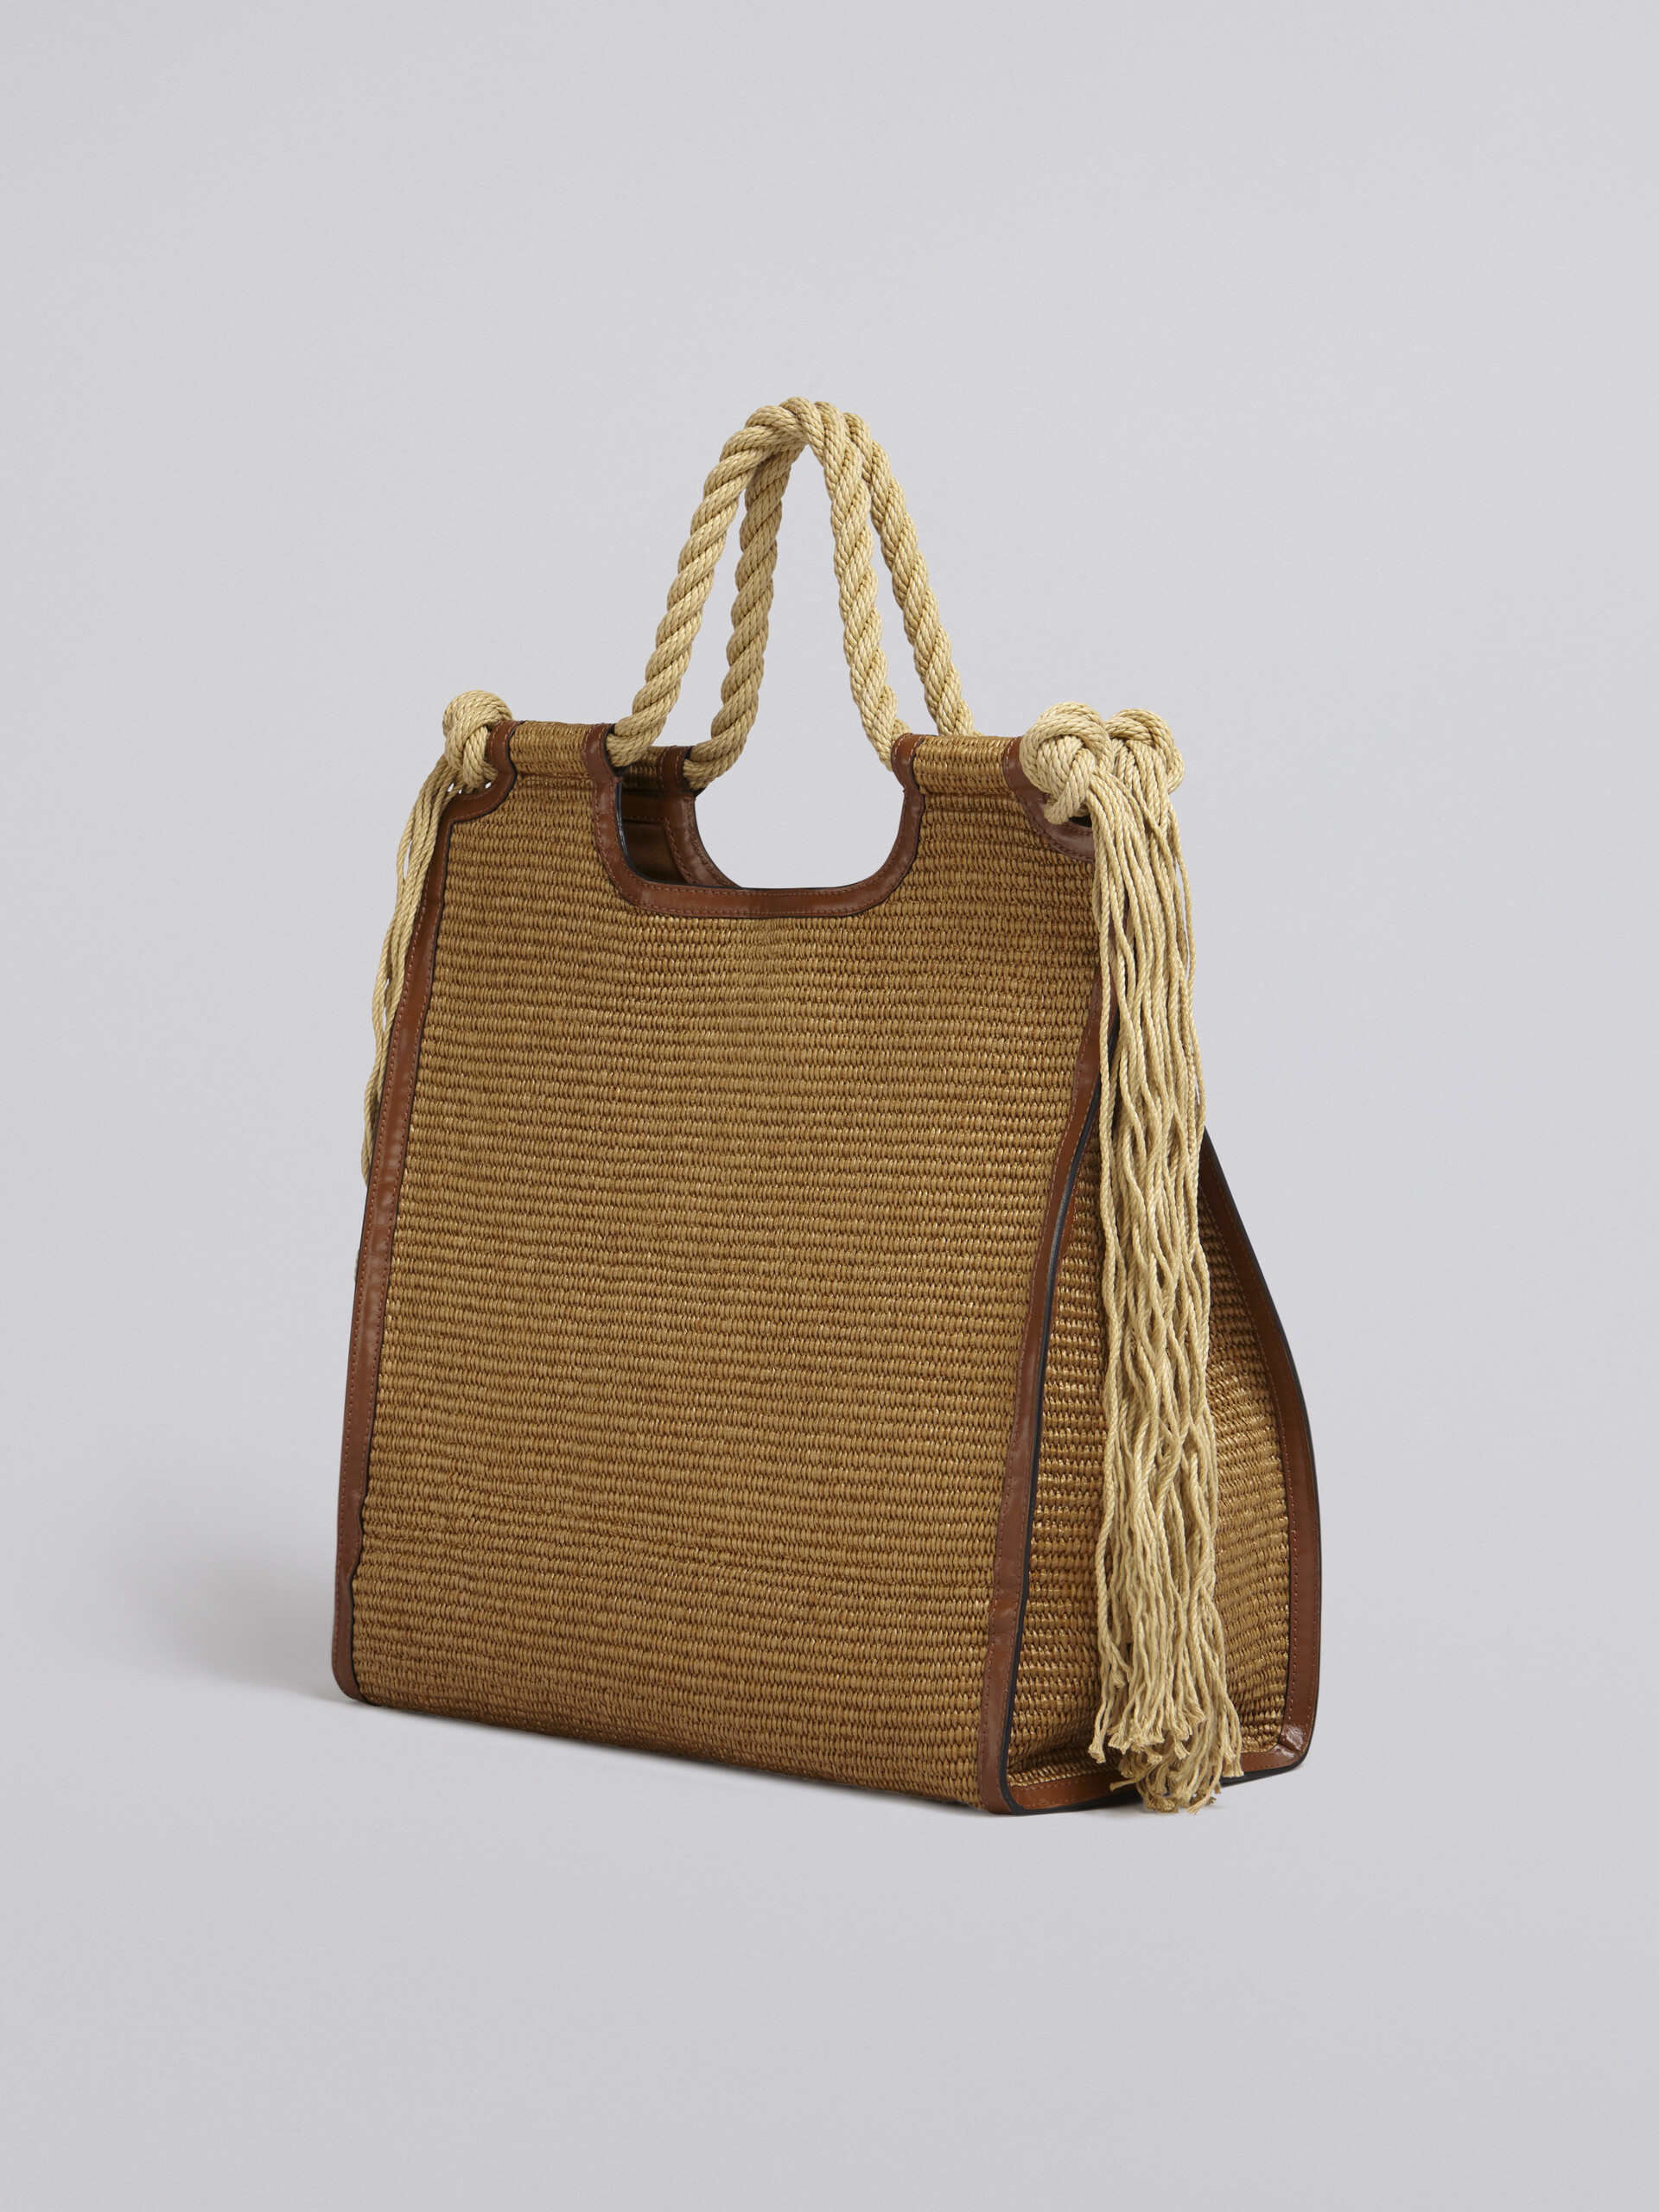 Marcel summer bag in brown leather and raffia with rope handles - Handbag - Image 2